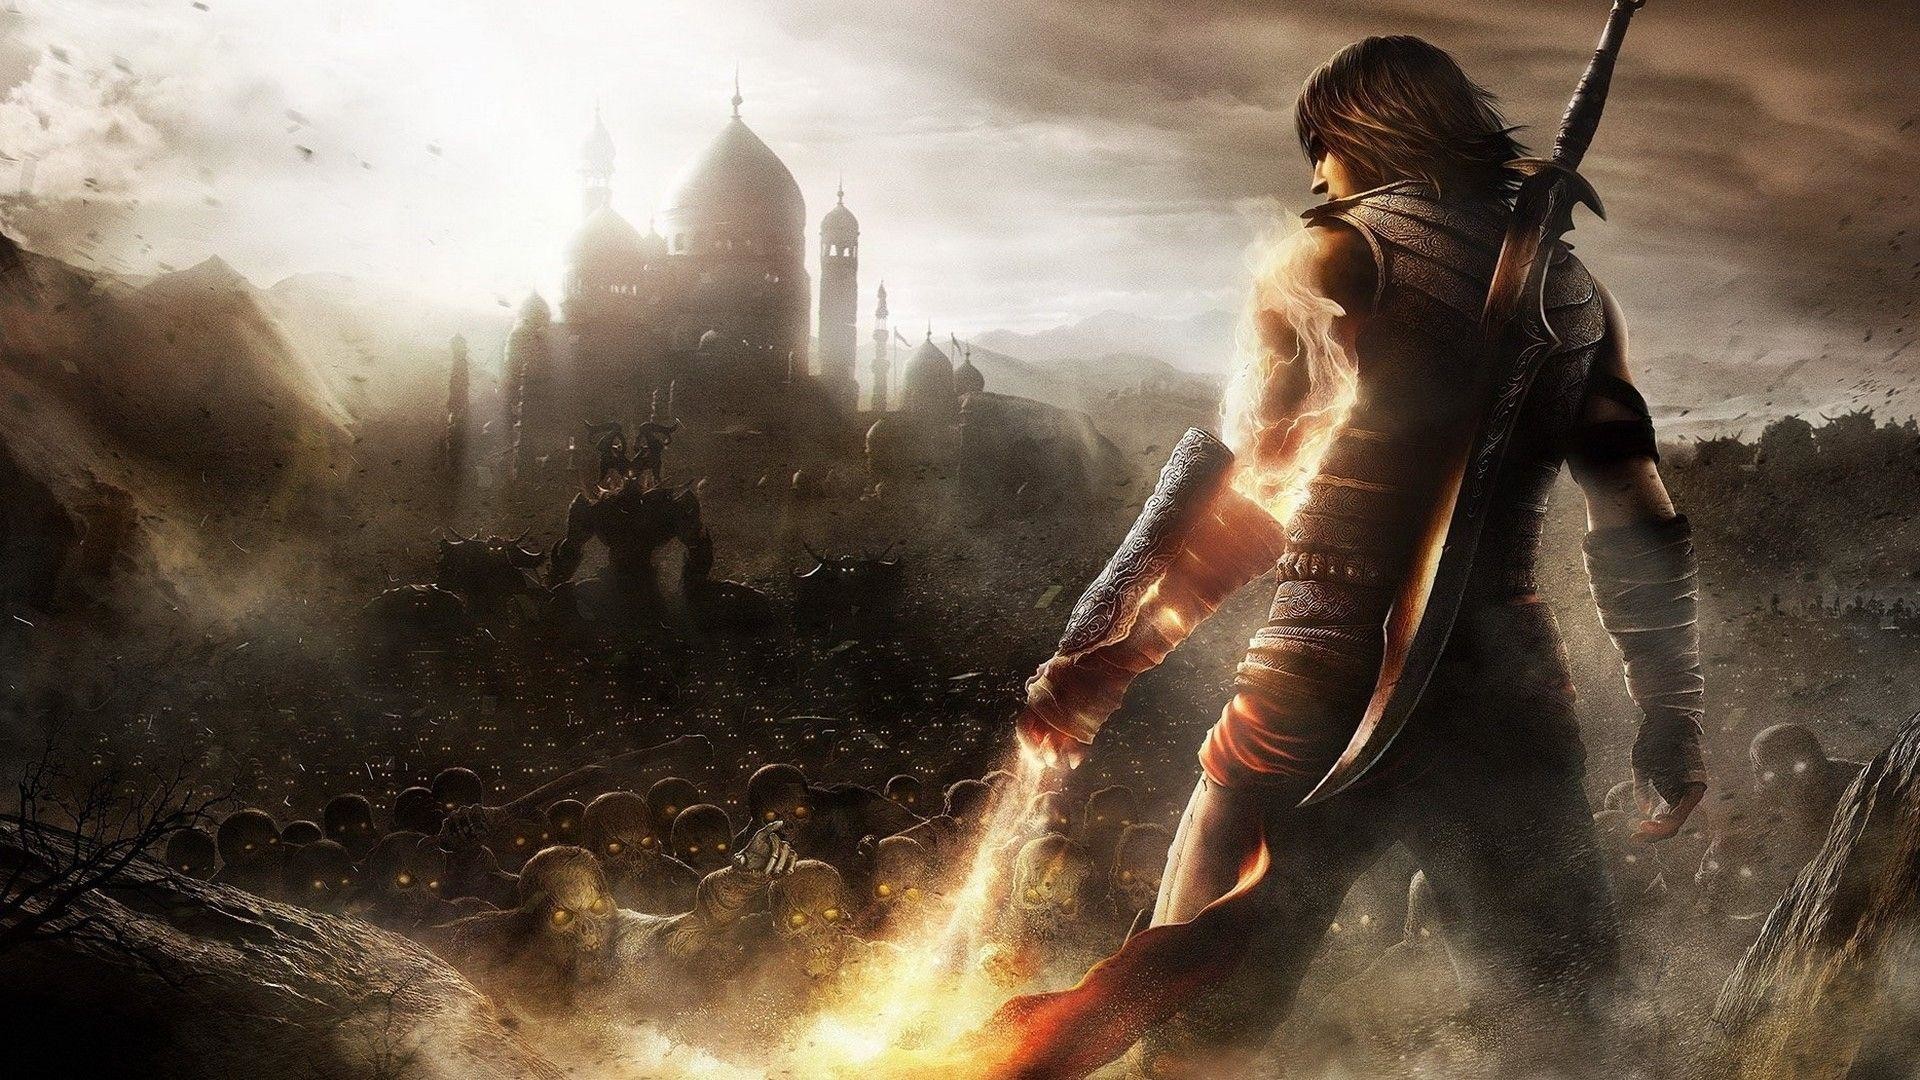 1920x1080 Prince of Persia the two thrones Wallpaper | HD Wallpapers .